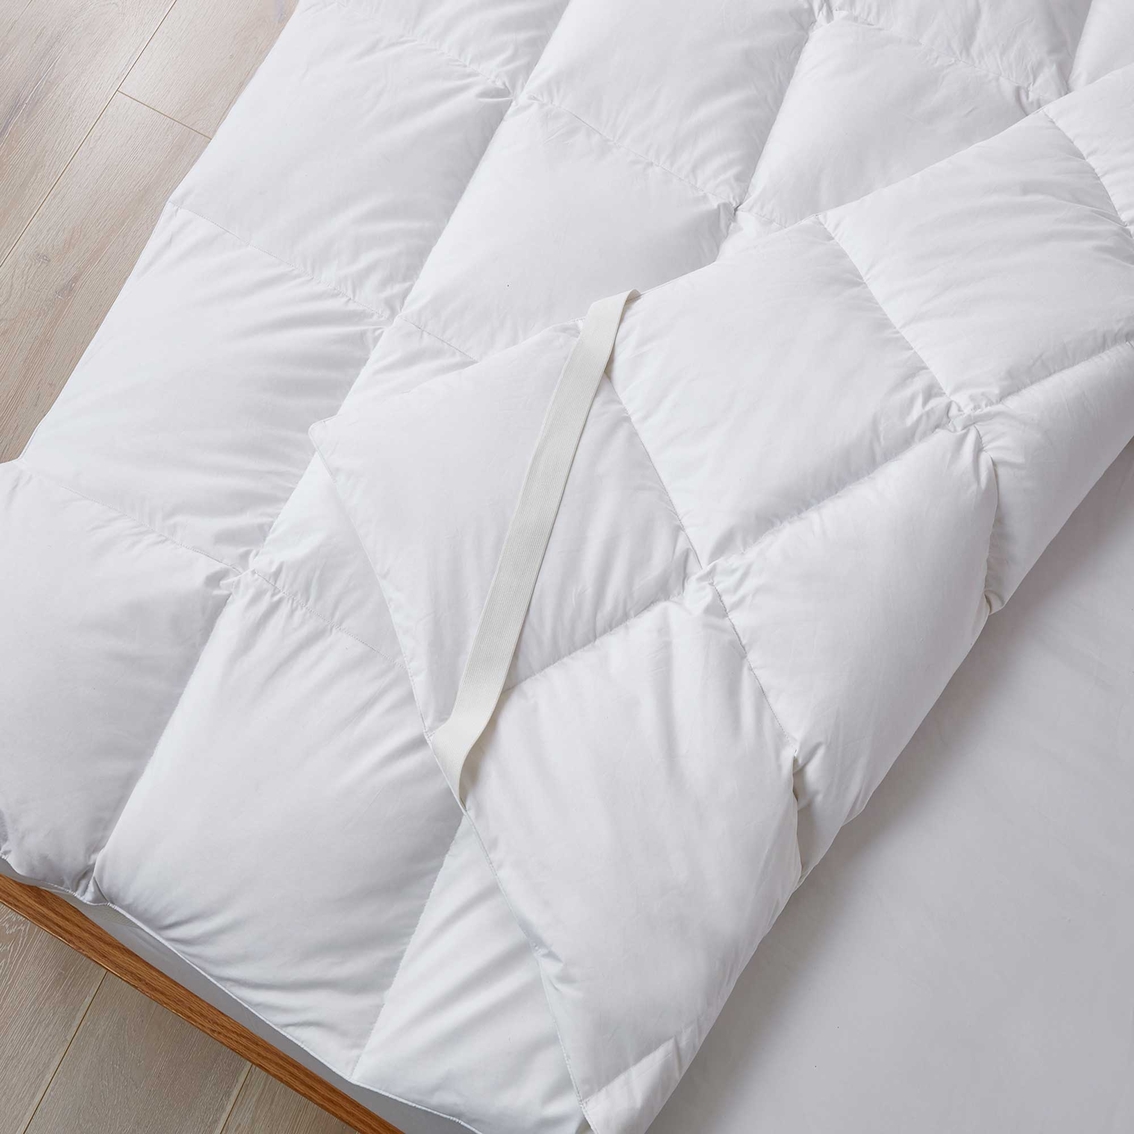 Serta 240 Thread Count 90/10 Goose Feather/Down Fiber Featherbed Mattress Topper - Image 5 of 7